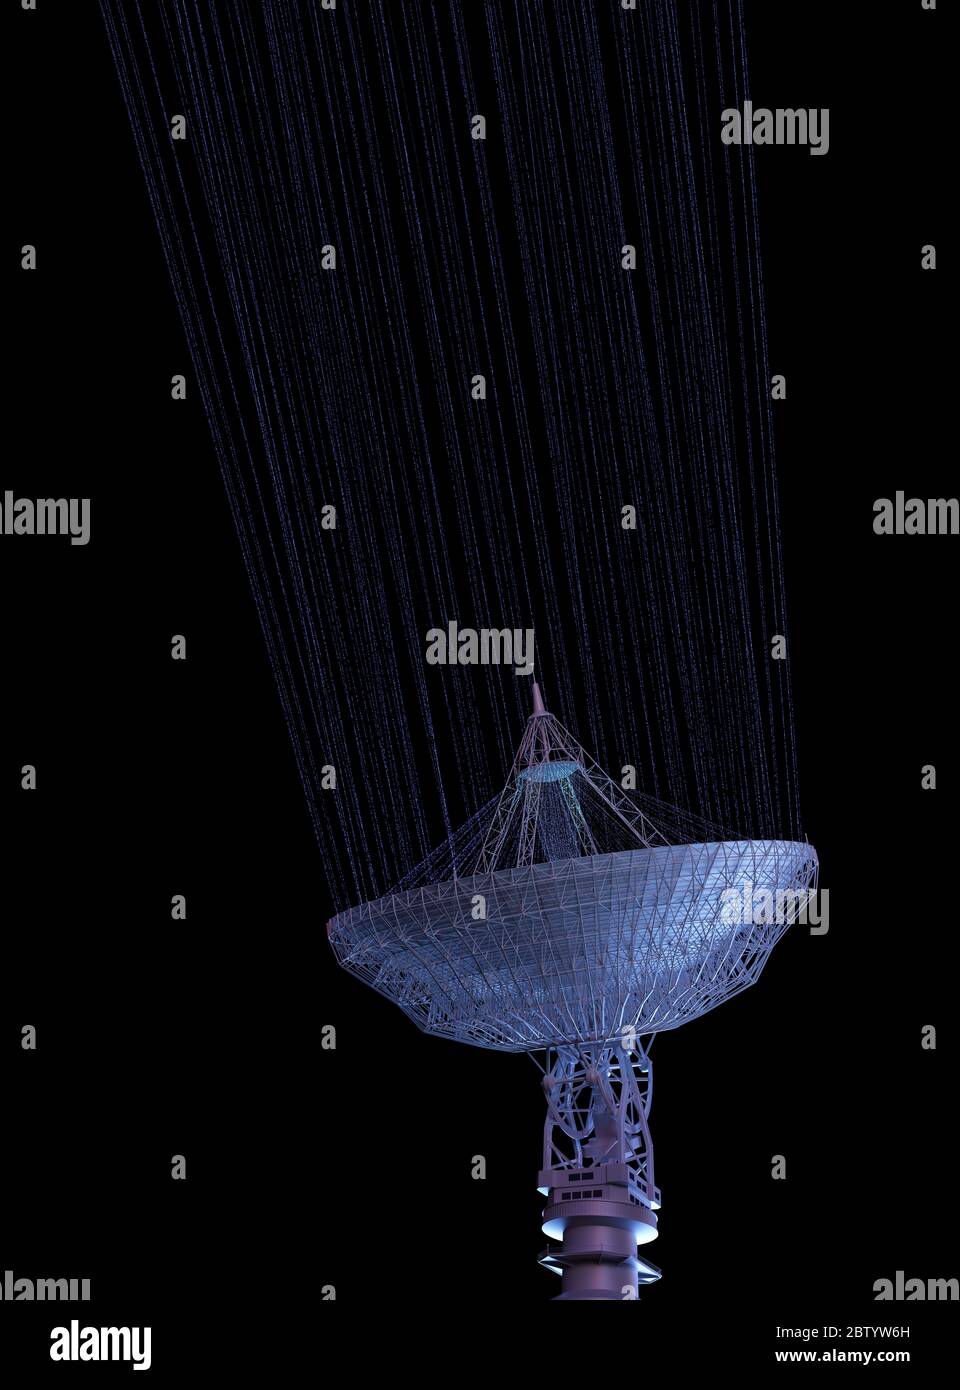 Huge satellite antenna dish for communication and signal reception out of the planet Earth. 3D illustration with clipping path included. Stock Photo